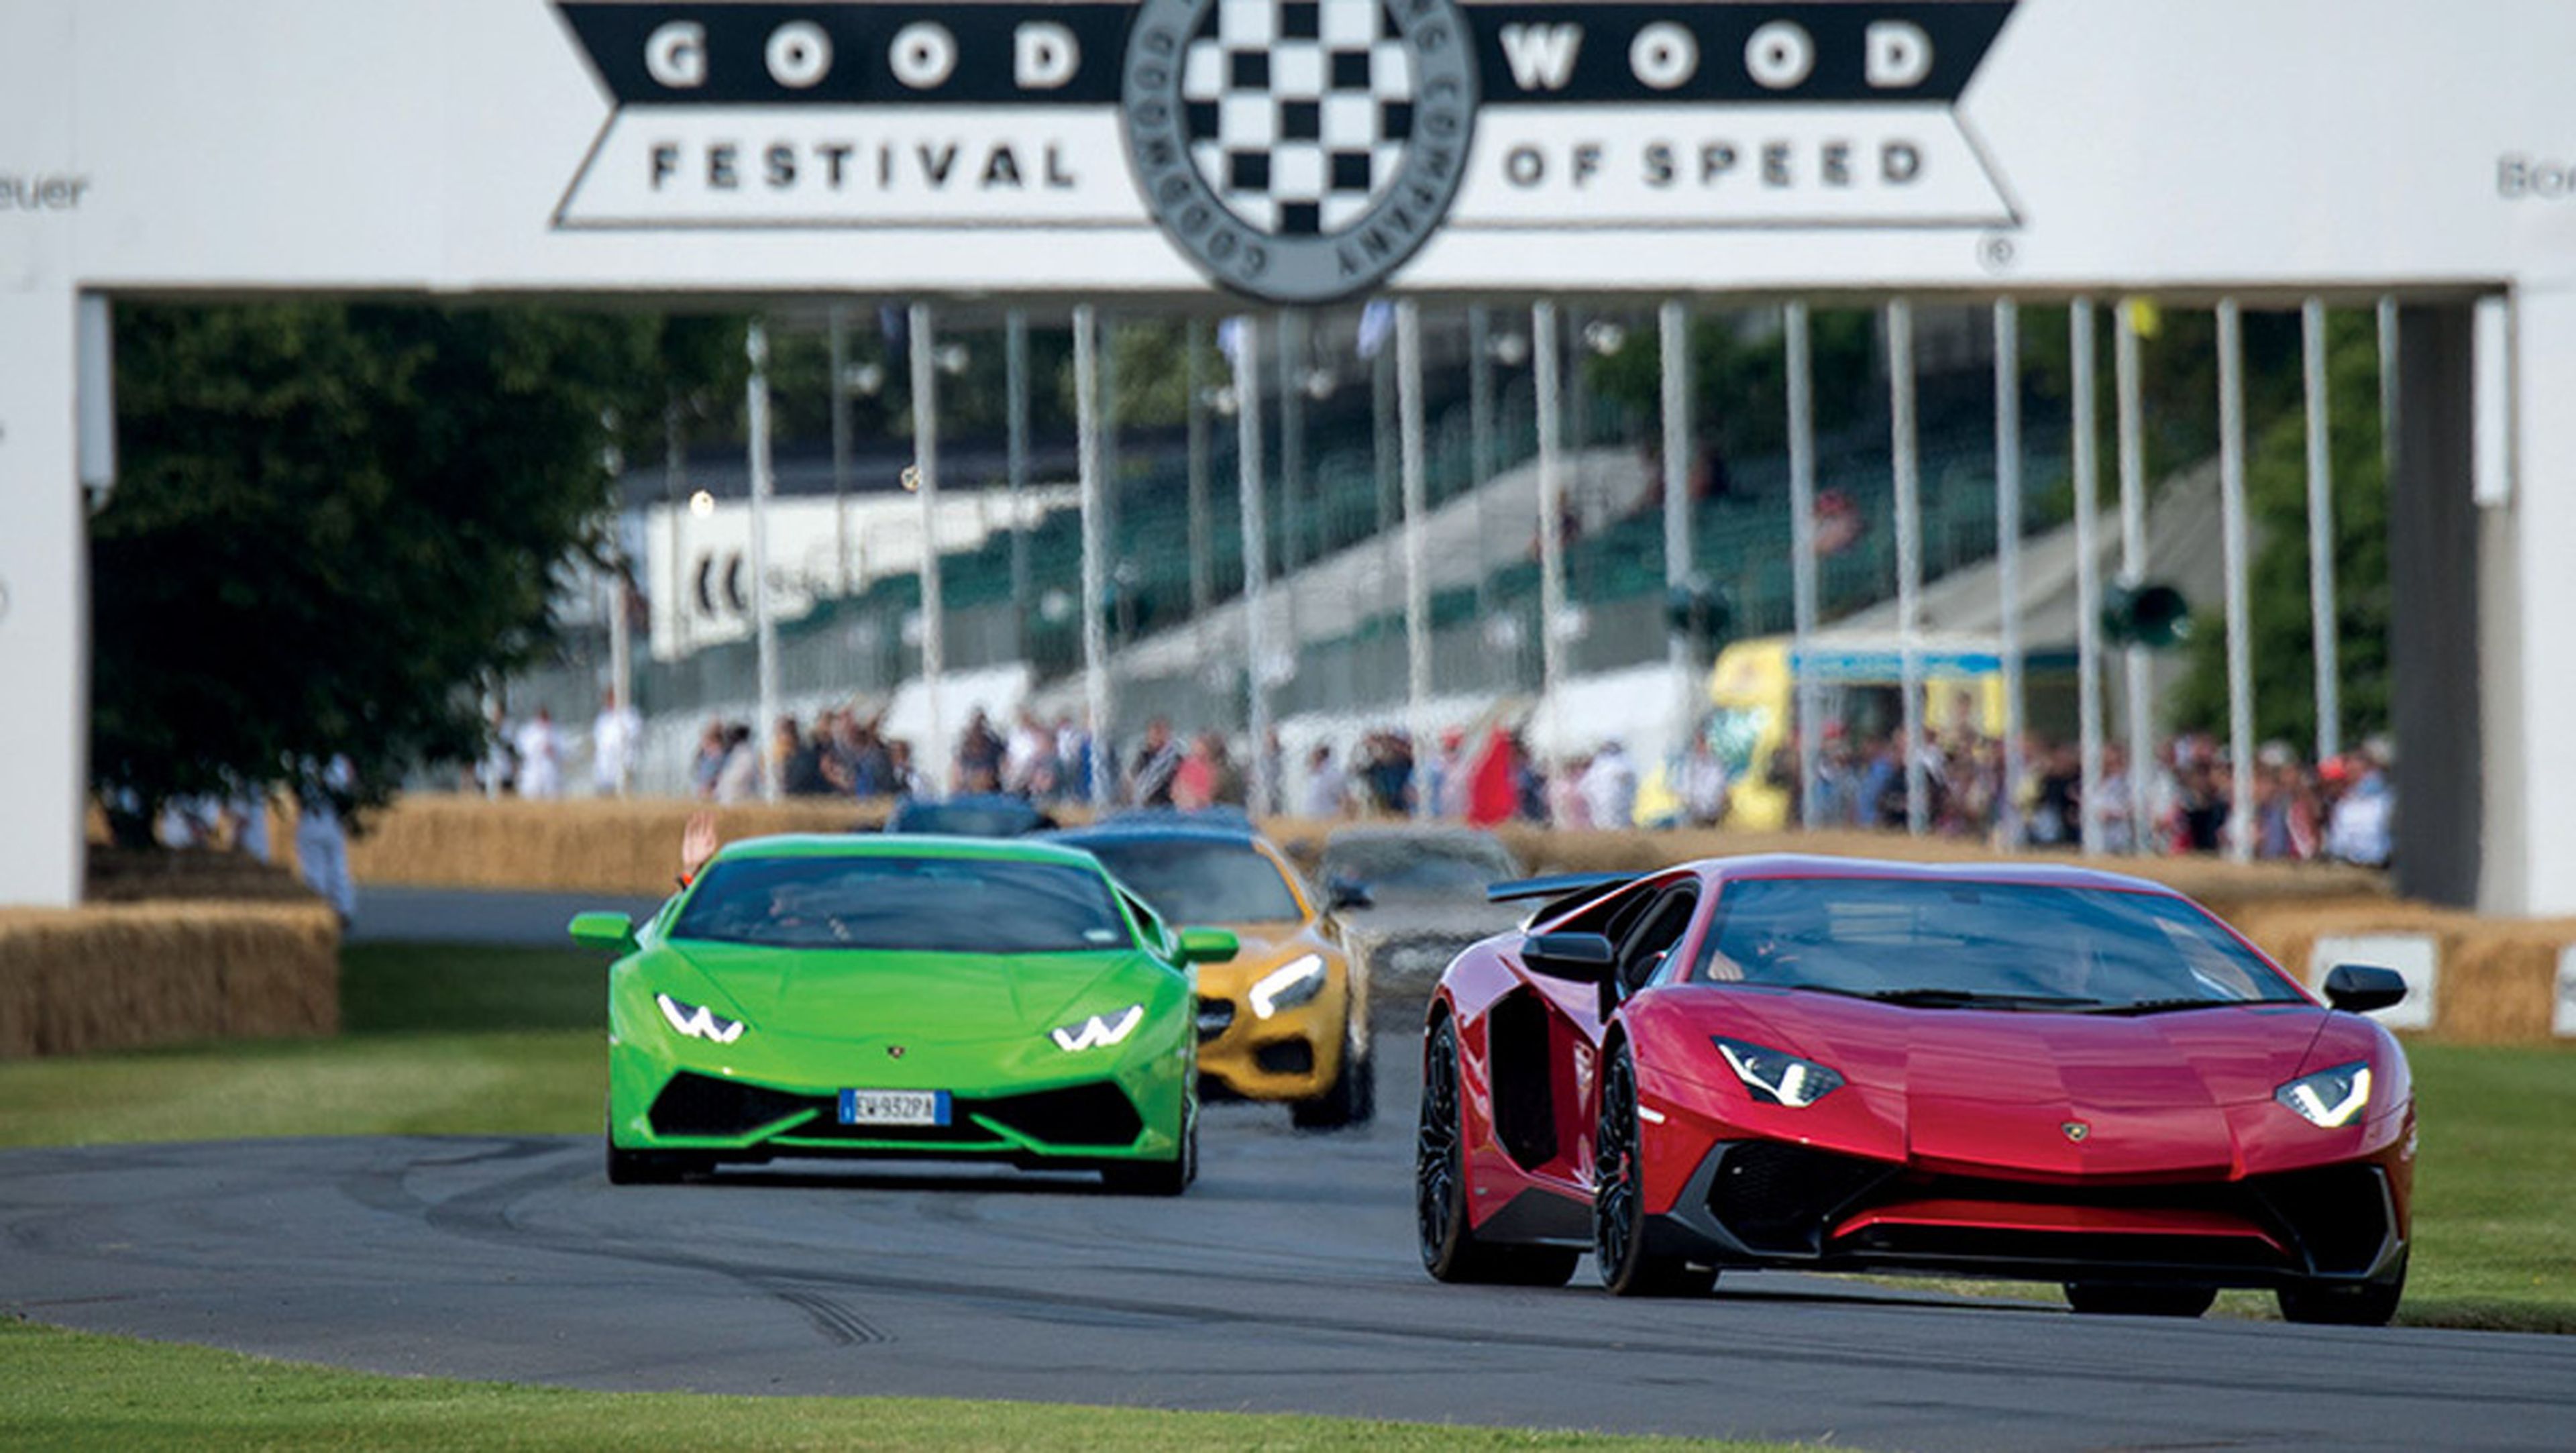 Los hipercoches del GoodWood Festoval of Speed